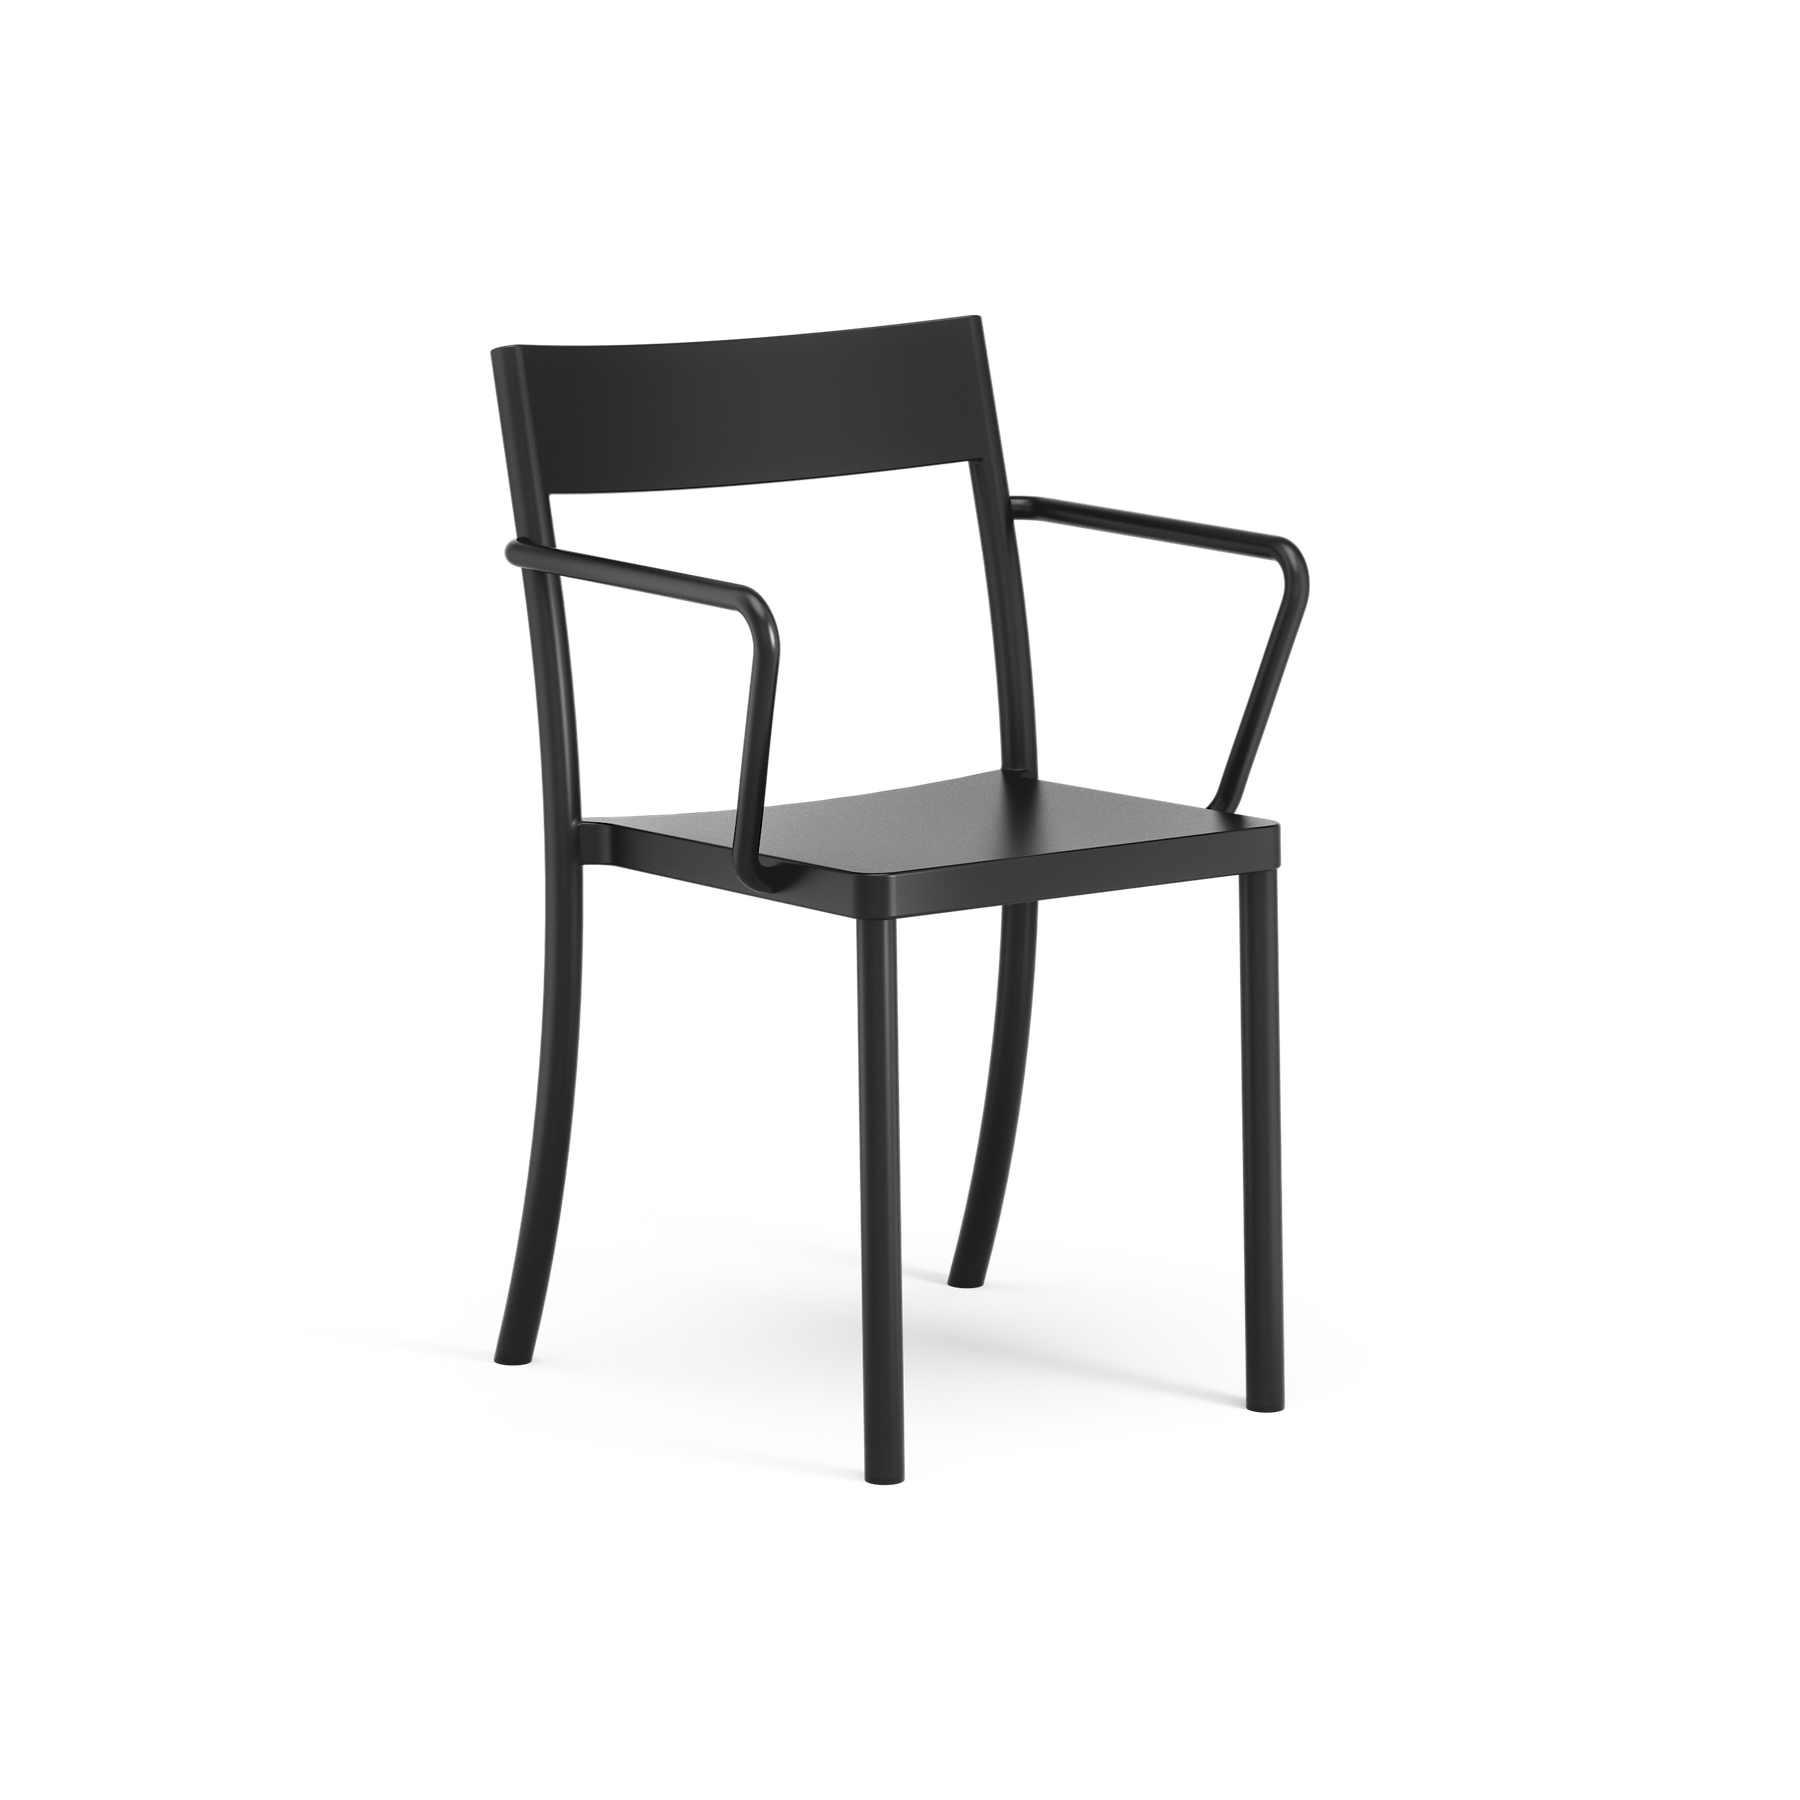 A-stack armchair